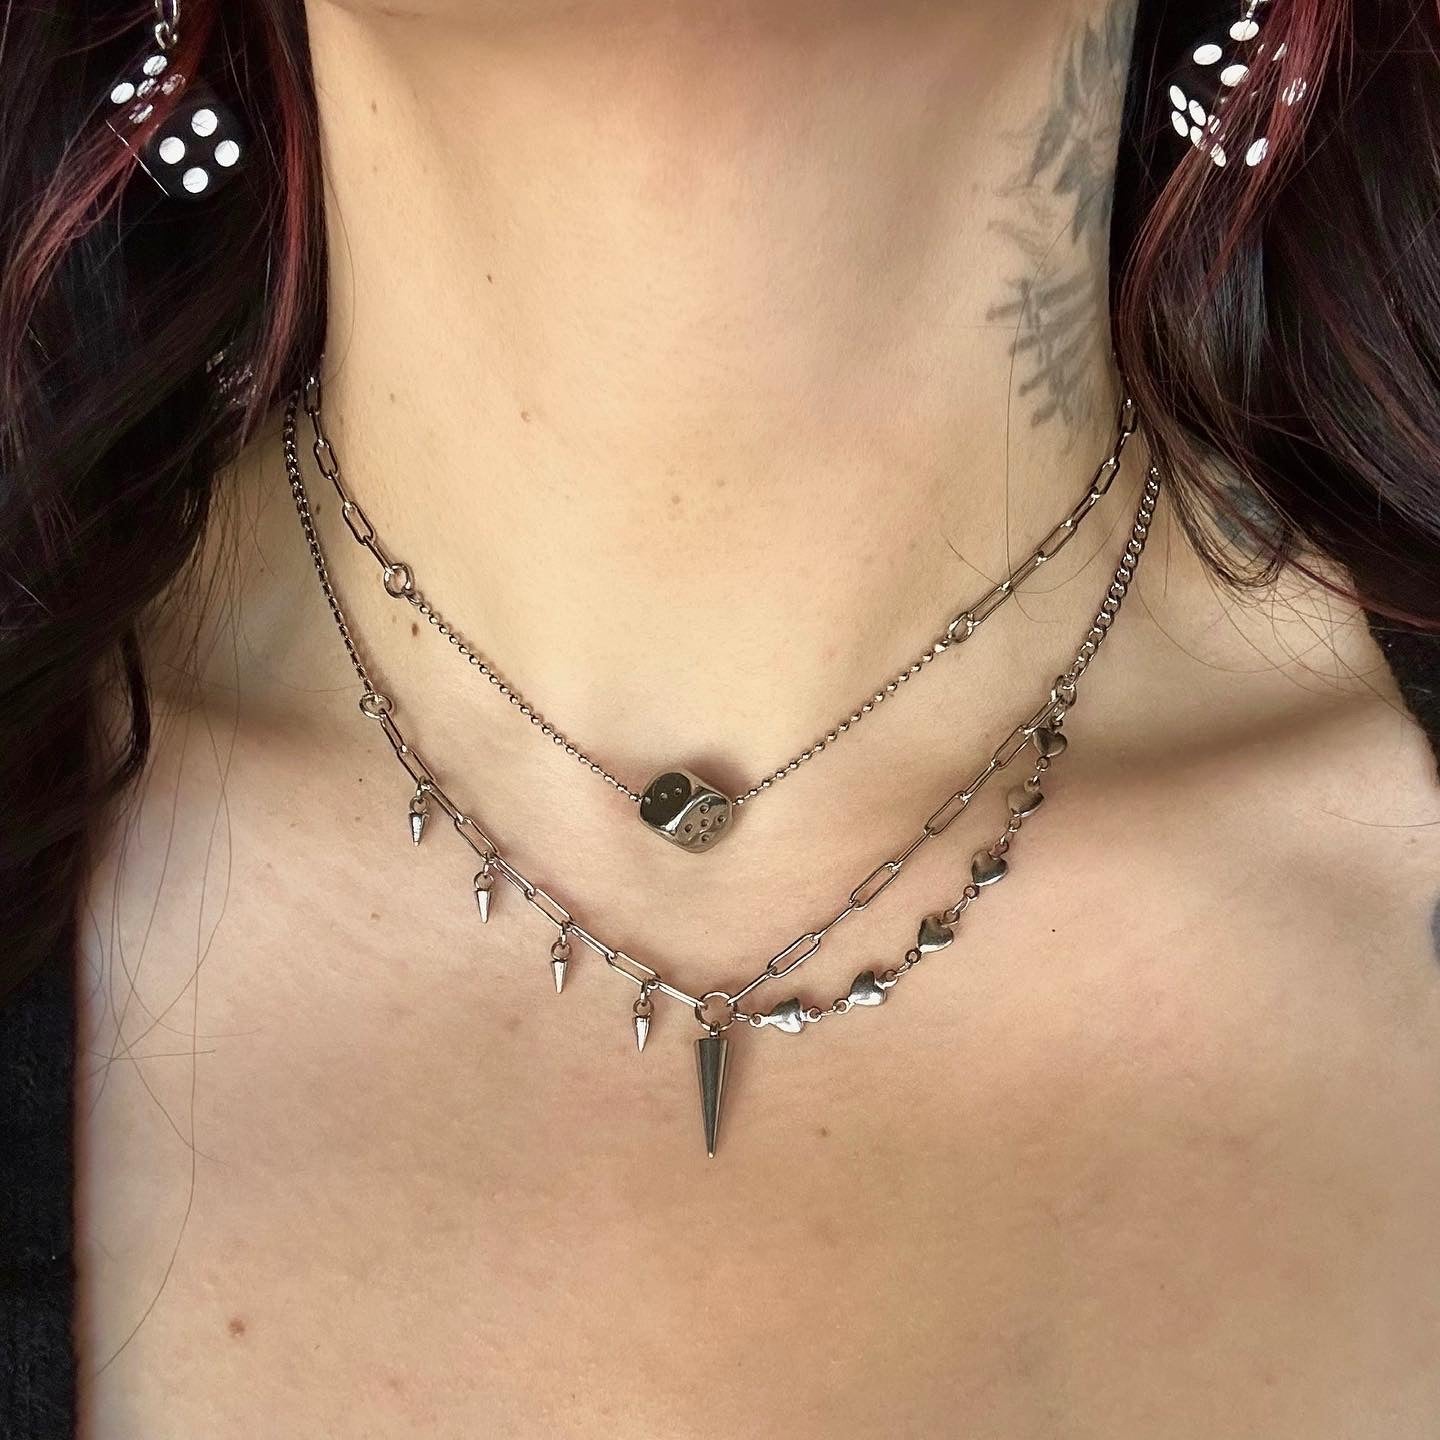 Talis Necklace - While Odin Sleeps